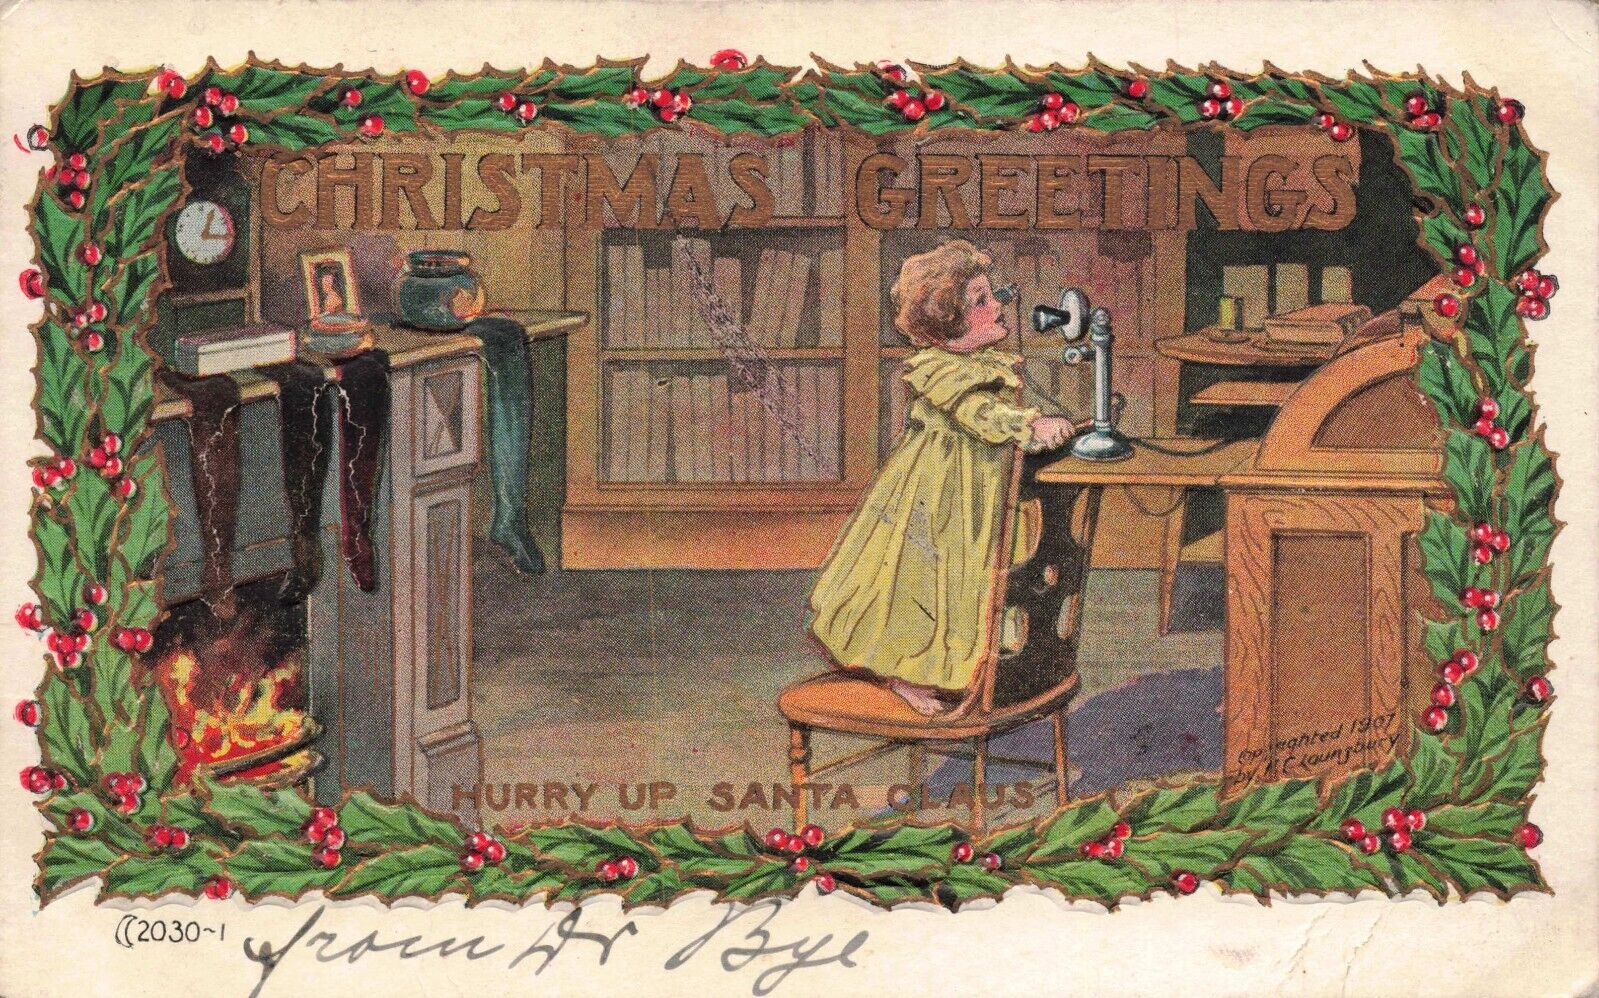 Christmas Girl Calls Santa Claus on Old Phone Stockings Hang by Fire Postcard